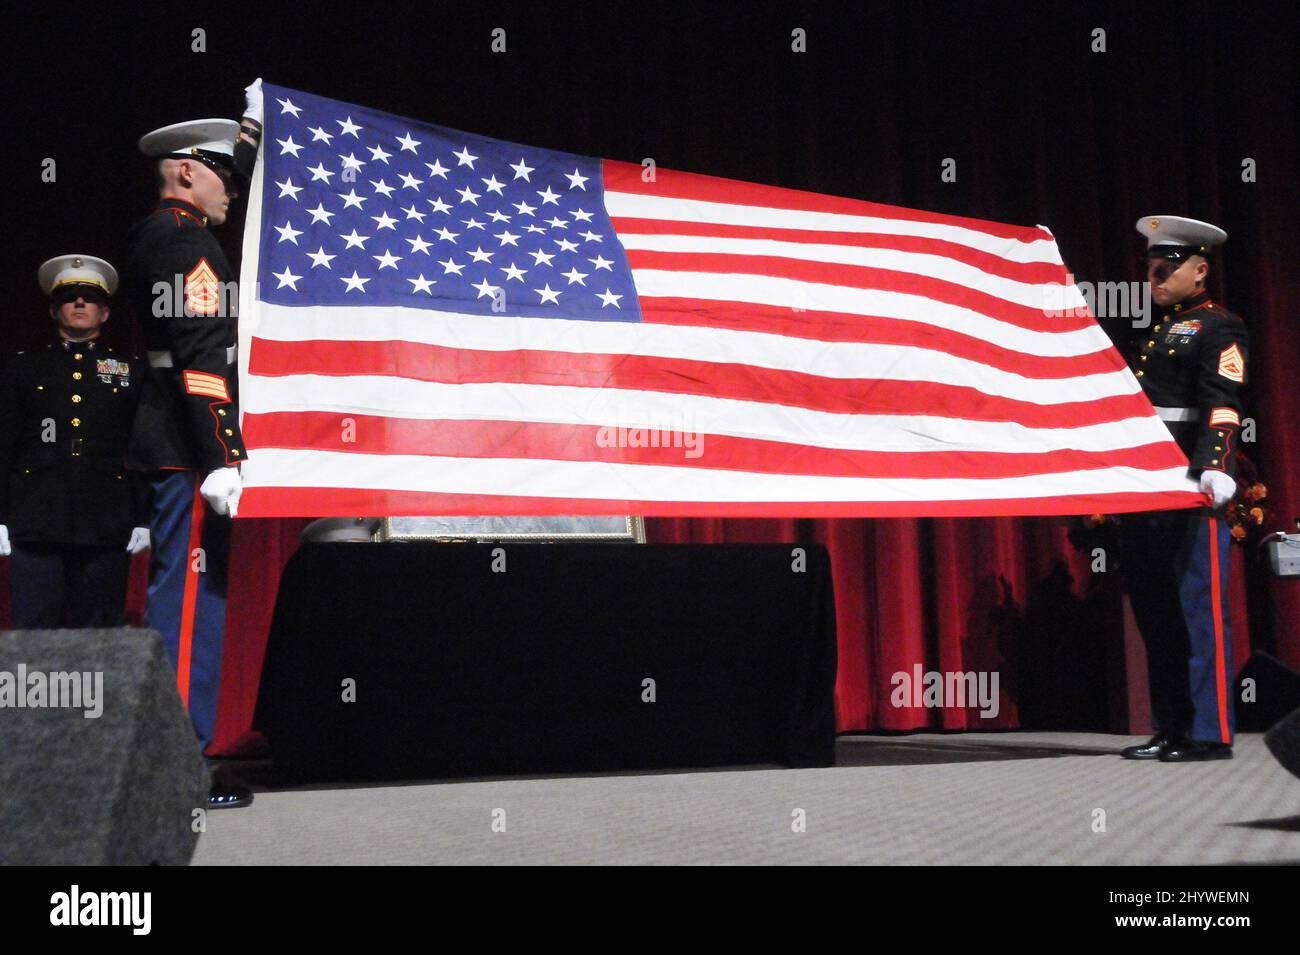 An American flag is held at the Academy of Television Arts and Sciences, Hollywood as NBC hosts a celebration of Ed McMahon's Life. Stock Photo